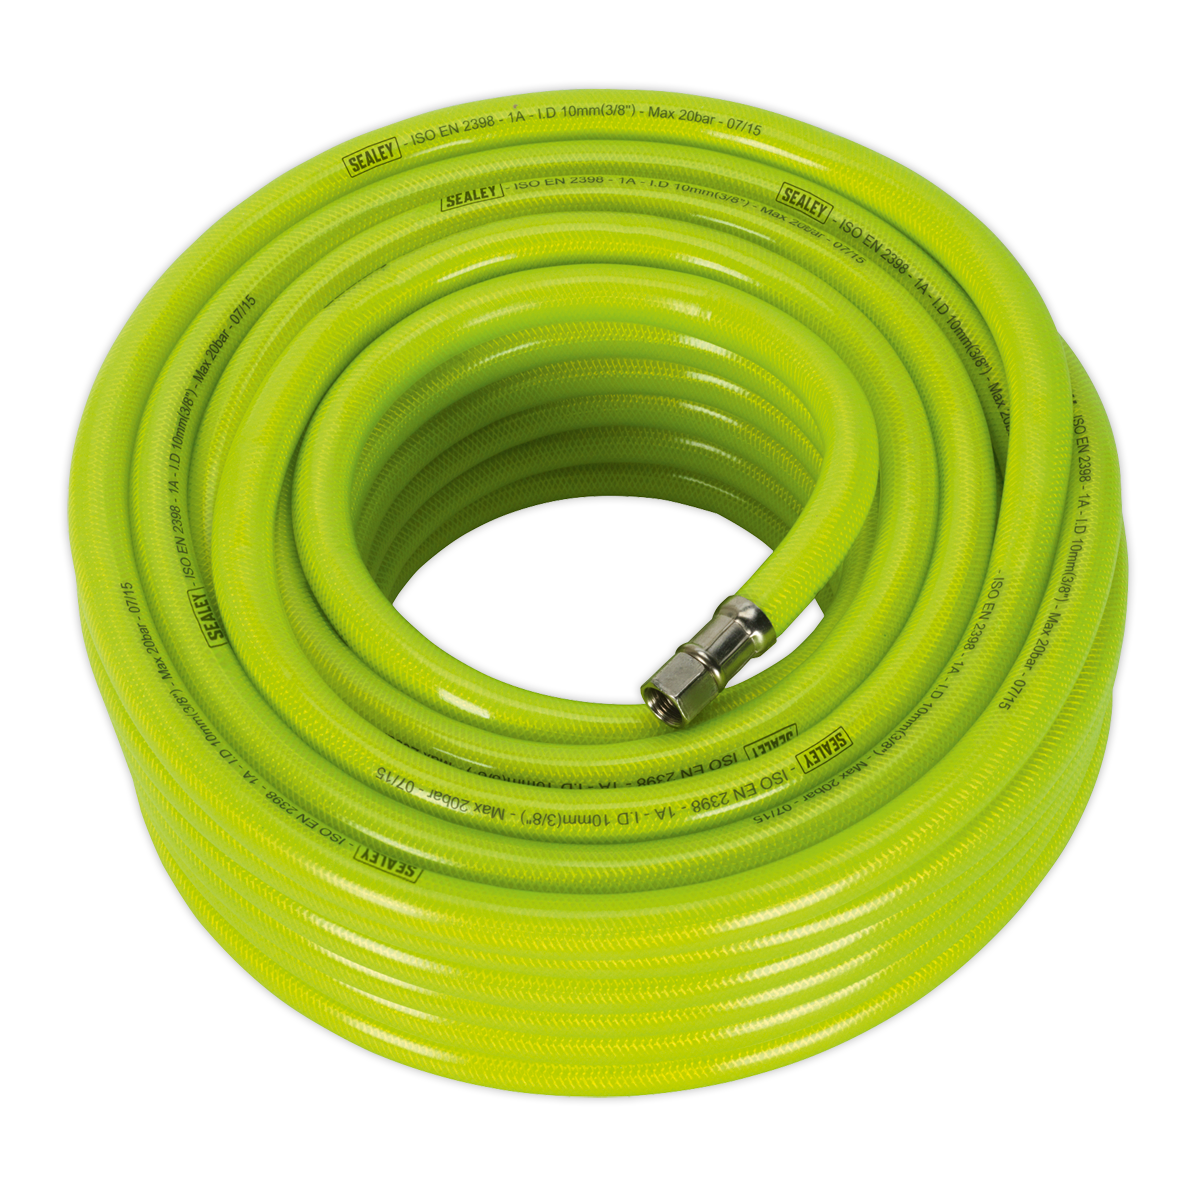 Sealey Air Hose High-Visibility 20m x Ø10mm with 1/4"BSP Unions